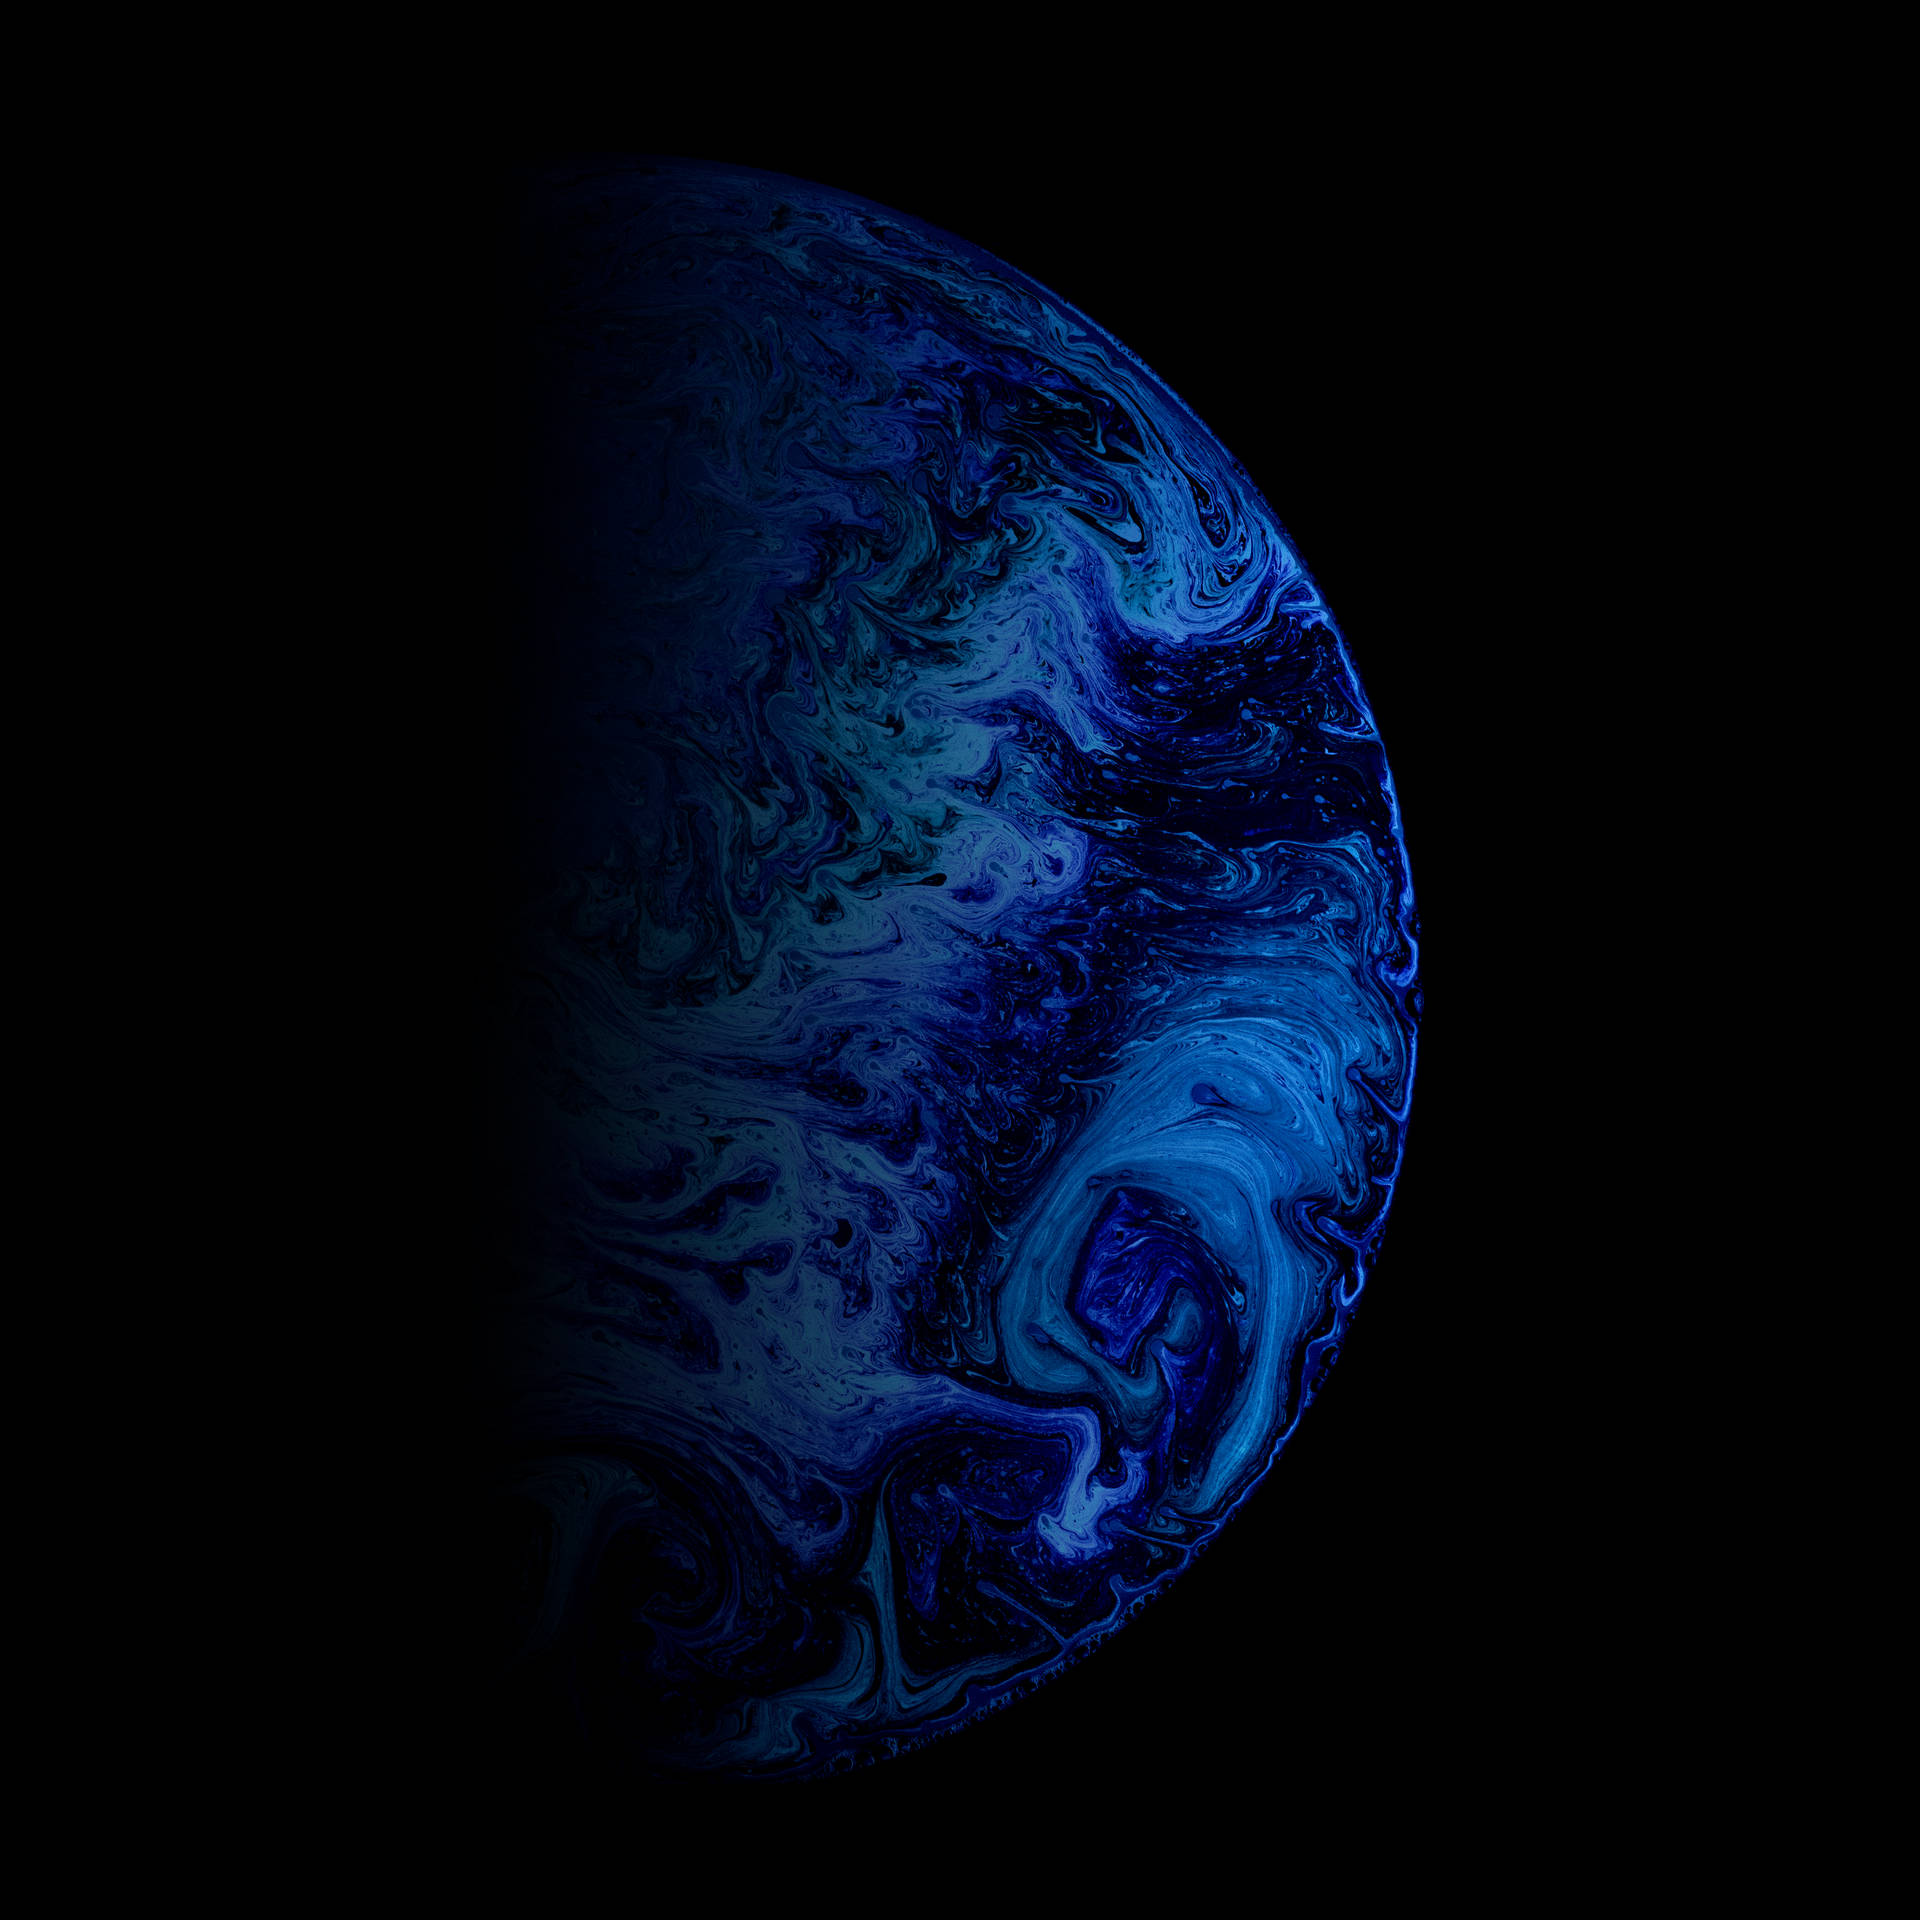 Oled 8008X8008 Wallpaper and Background Image